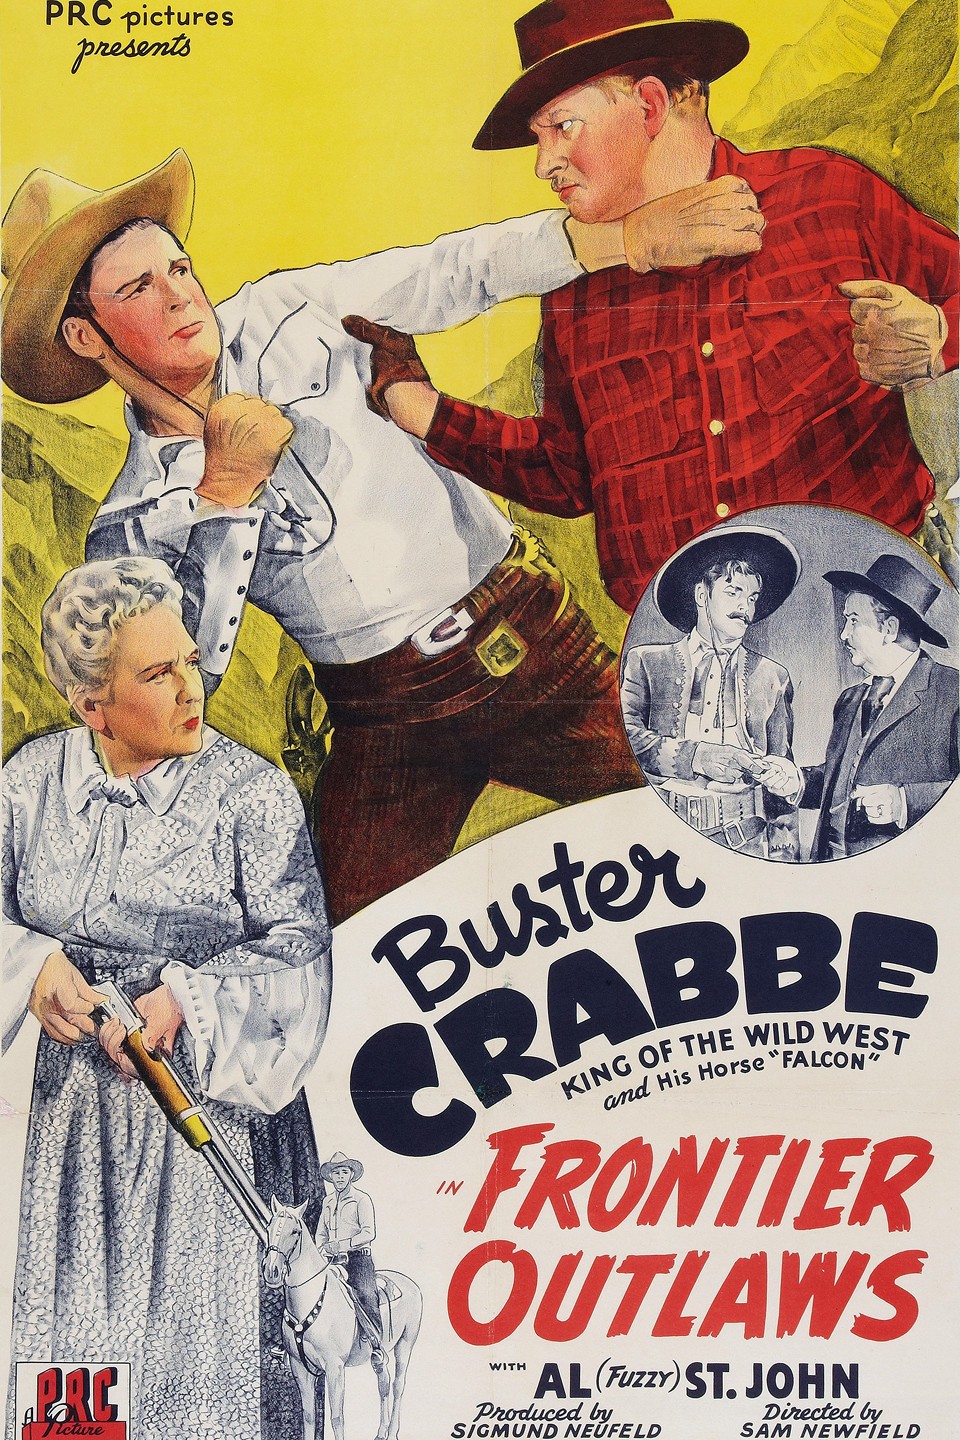 Movie Market - Photograph & Poster of Buster Crabbe 162779